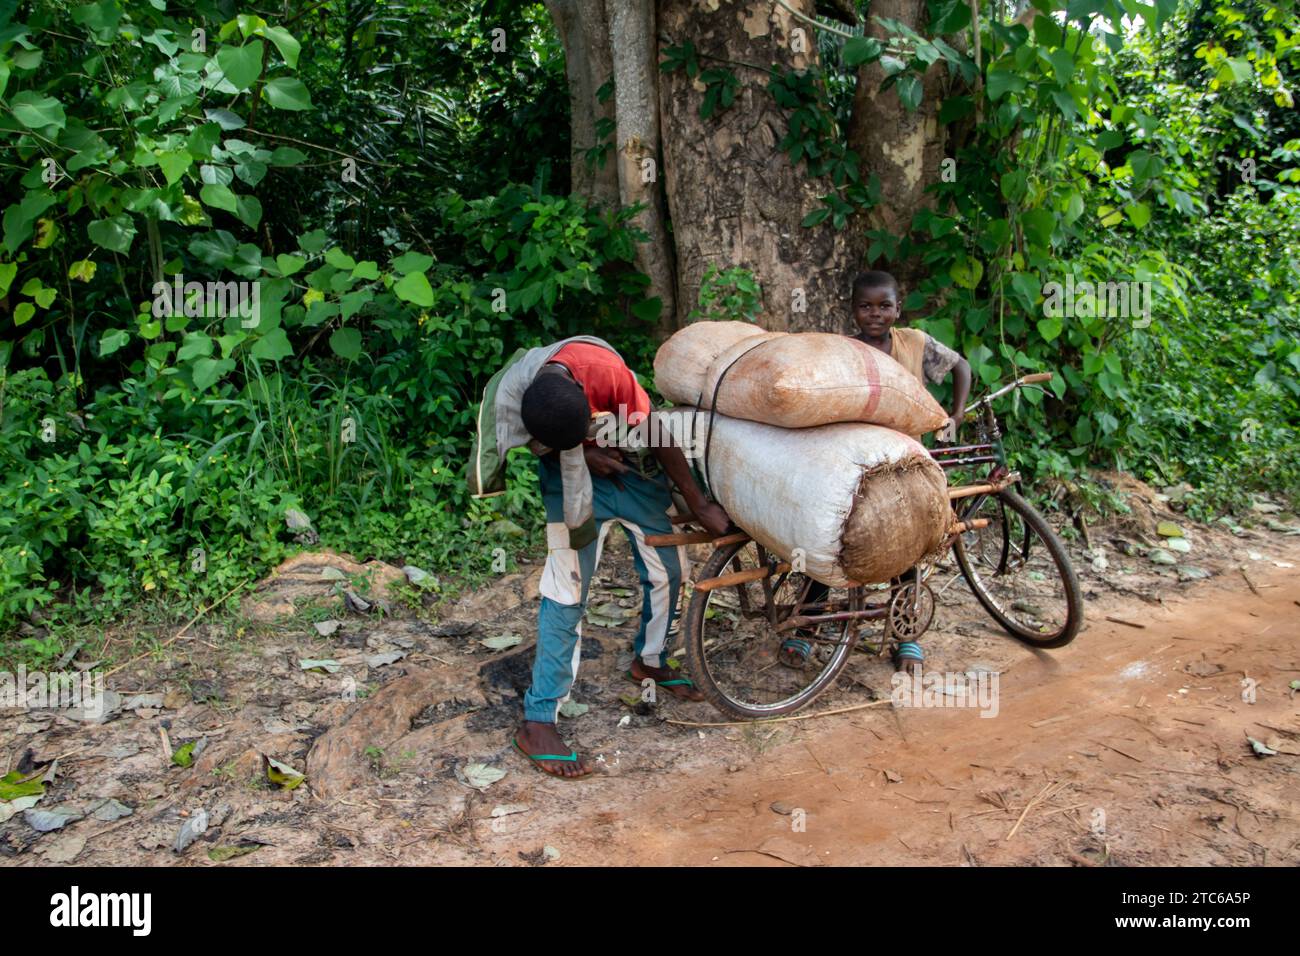 People of Africa in remote place on dirty road, caring goods on motorbikes after crossing the river, bicycles and their heads, life street photography Stock Photo